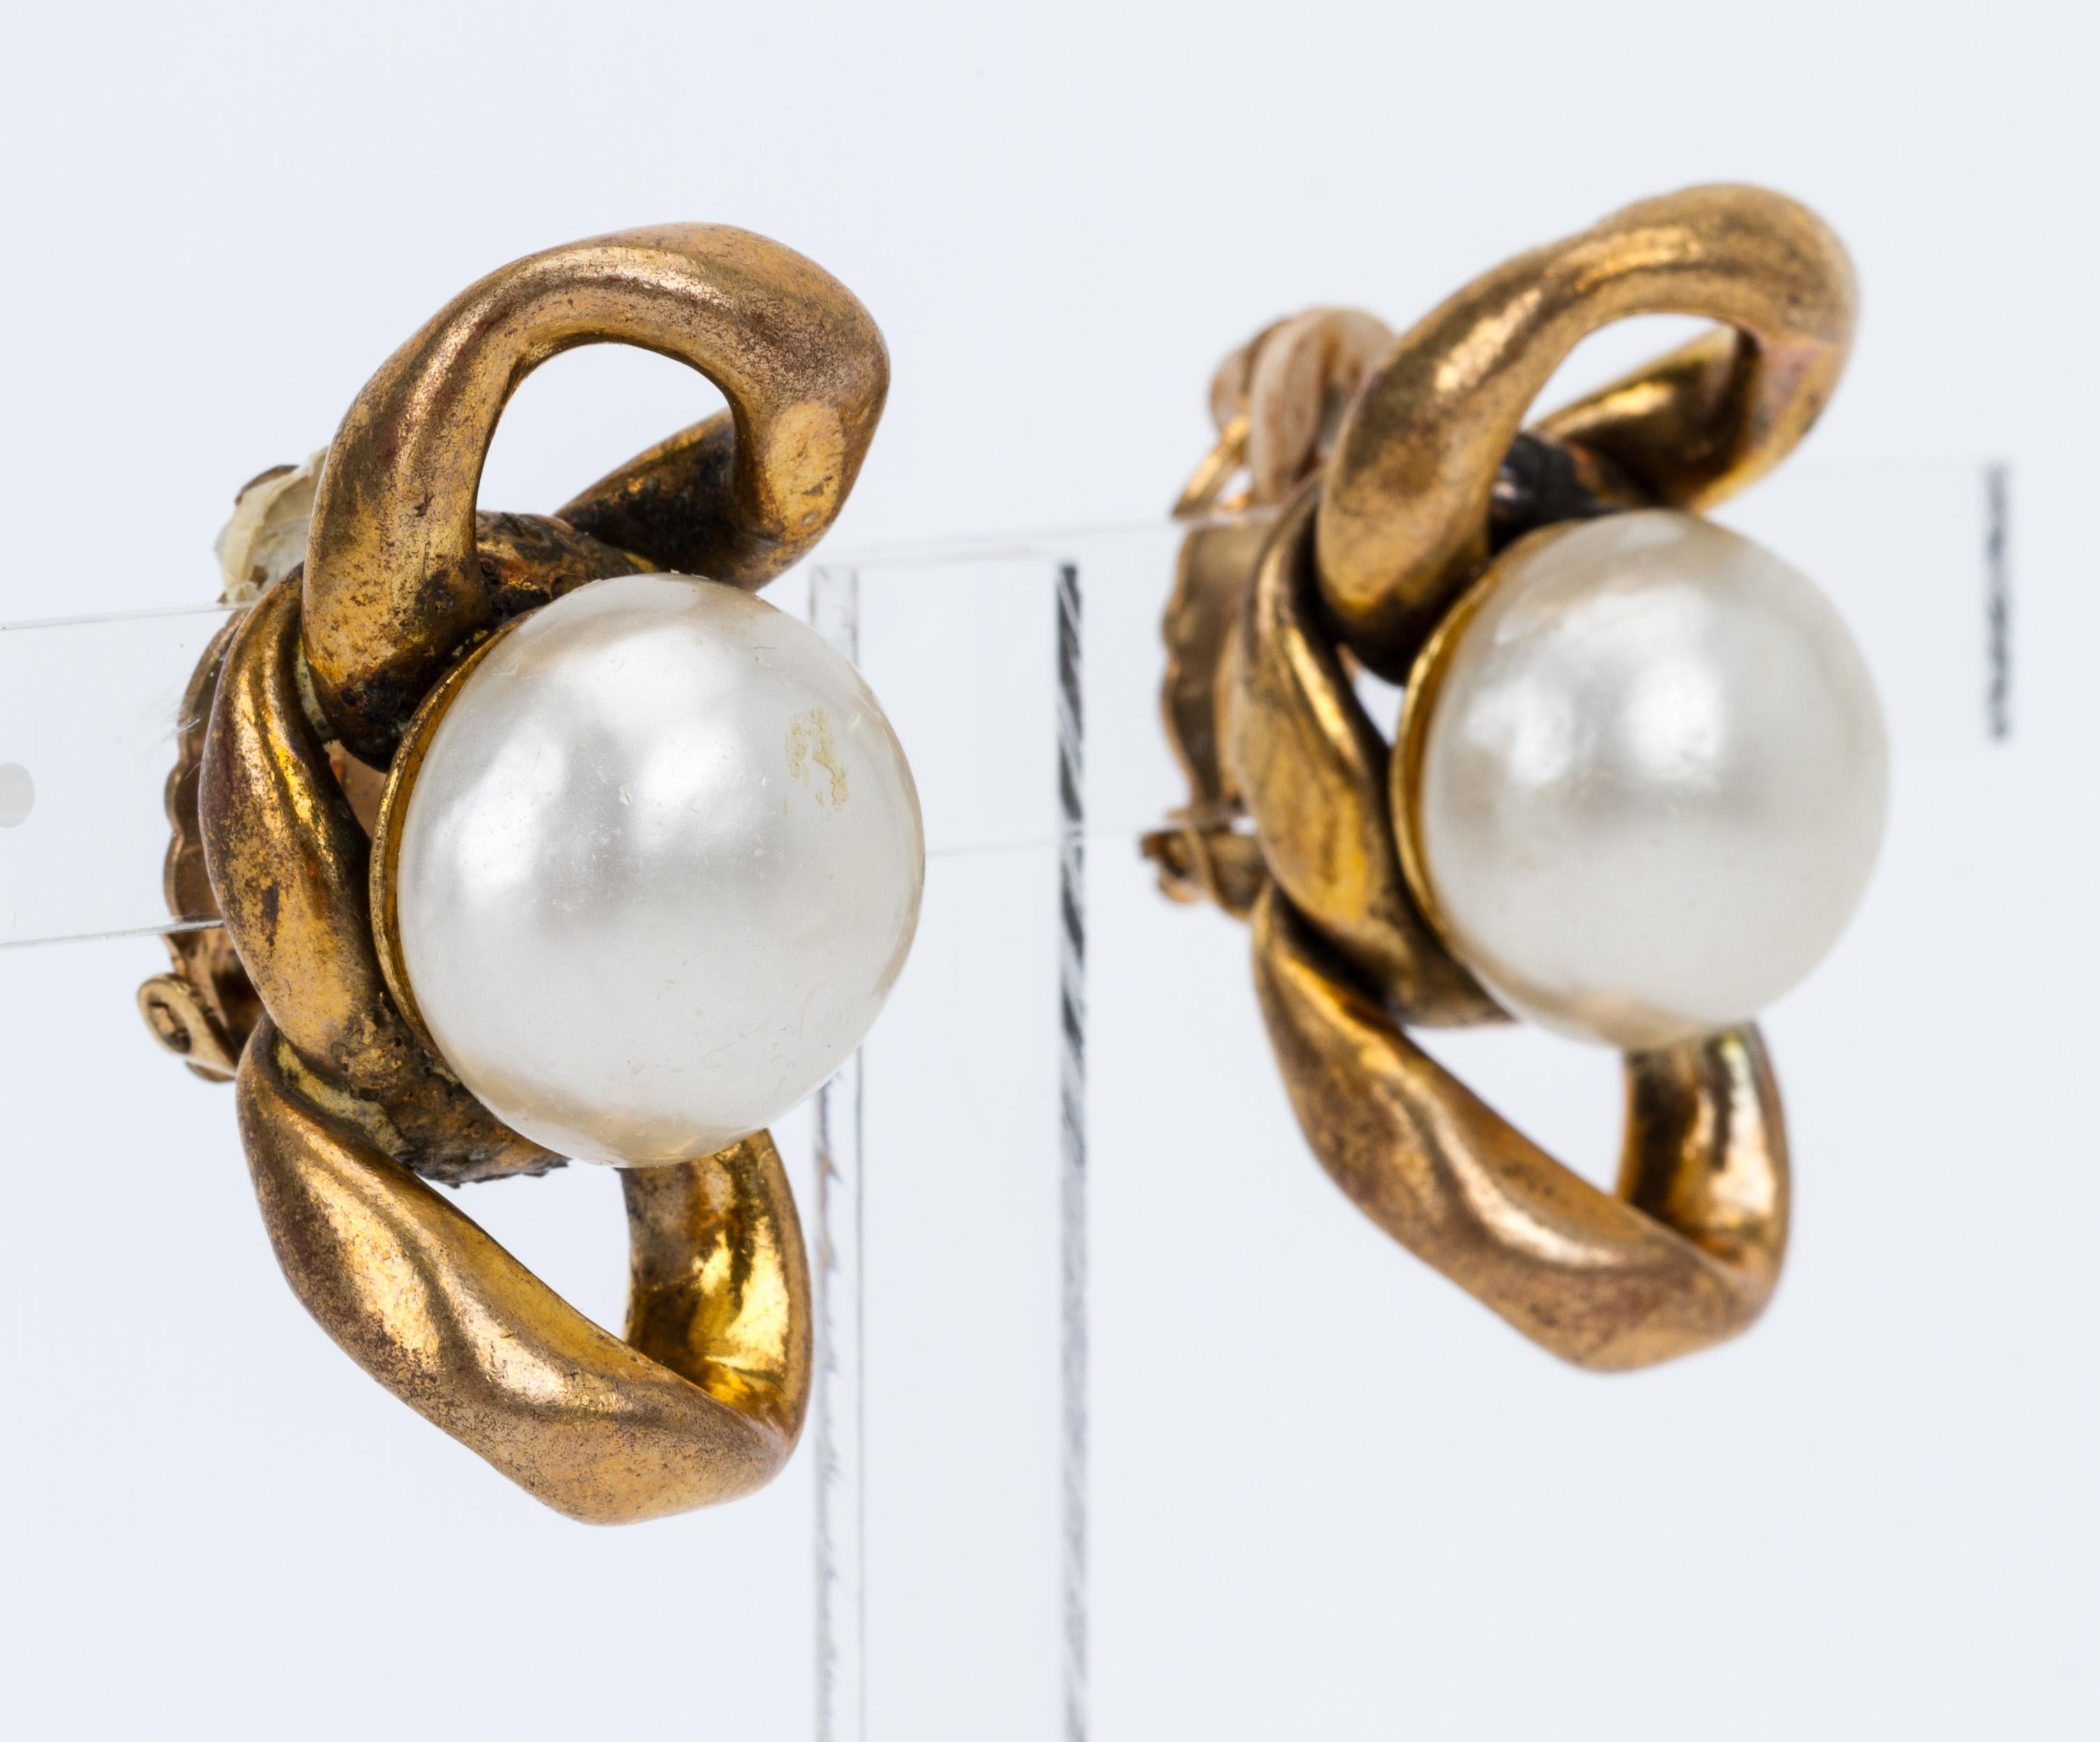 Chanel gold chain earrings with pearl center. Patina due to age. Come with original box.